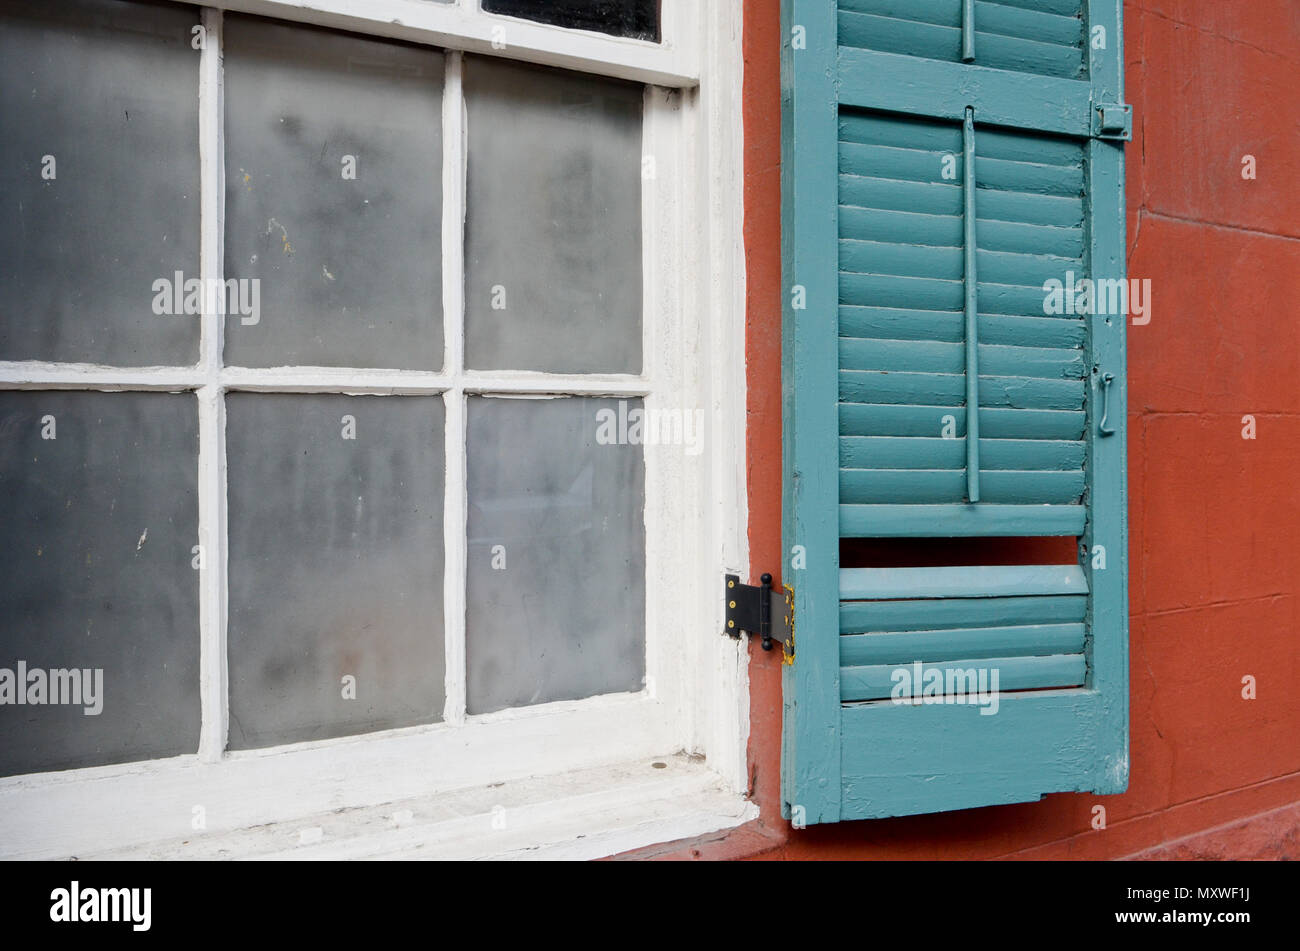 Various colors, textures and architecture around New Orleans, Louisiana Stock Photo